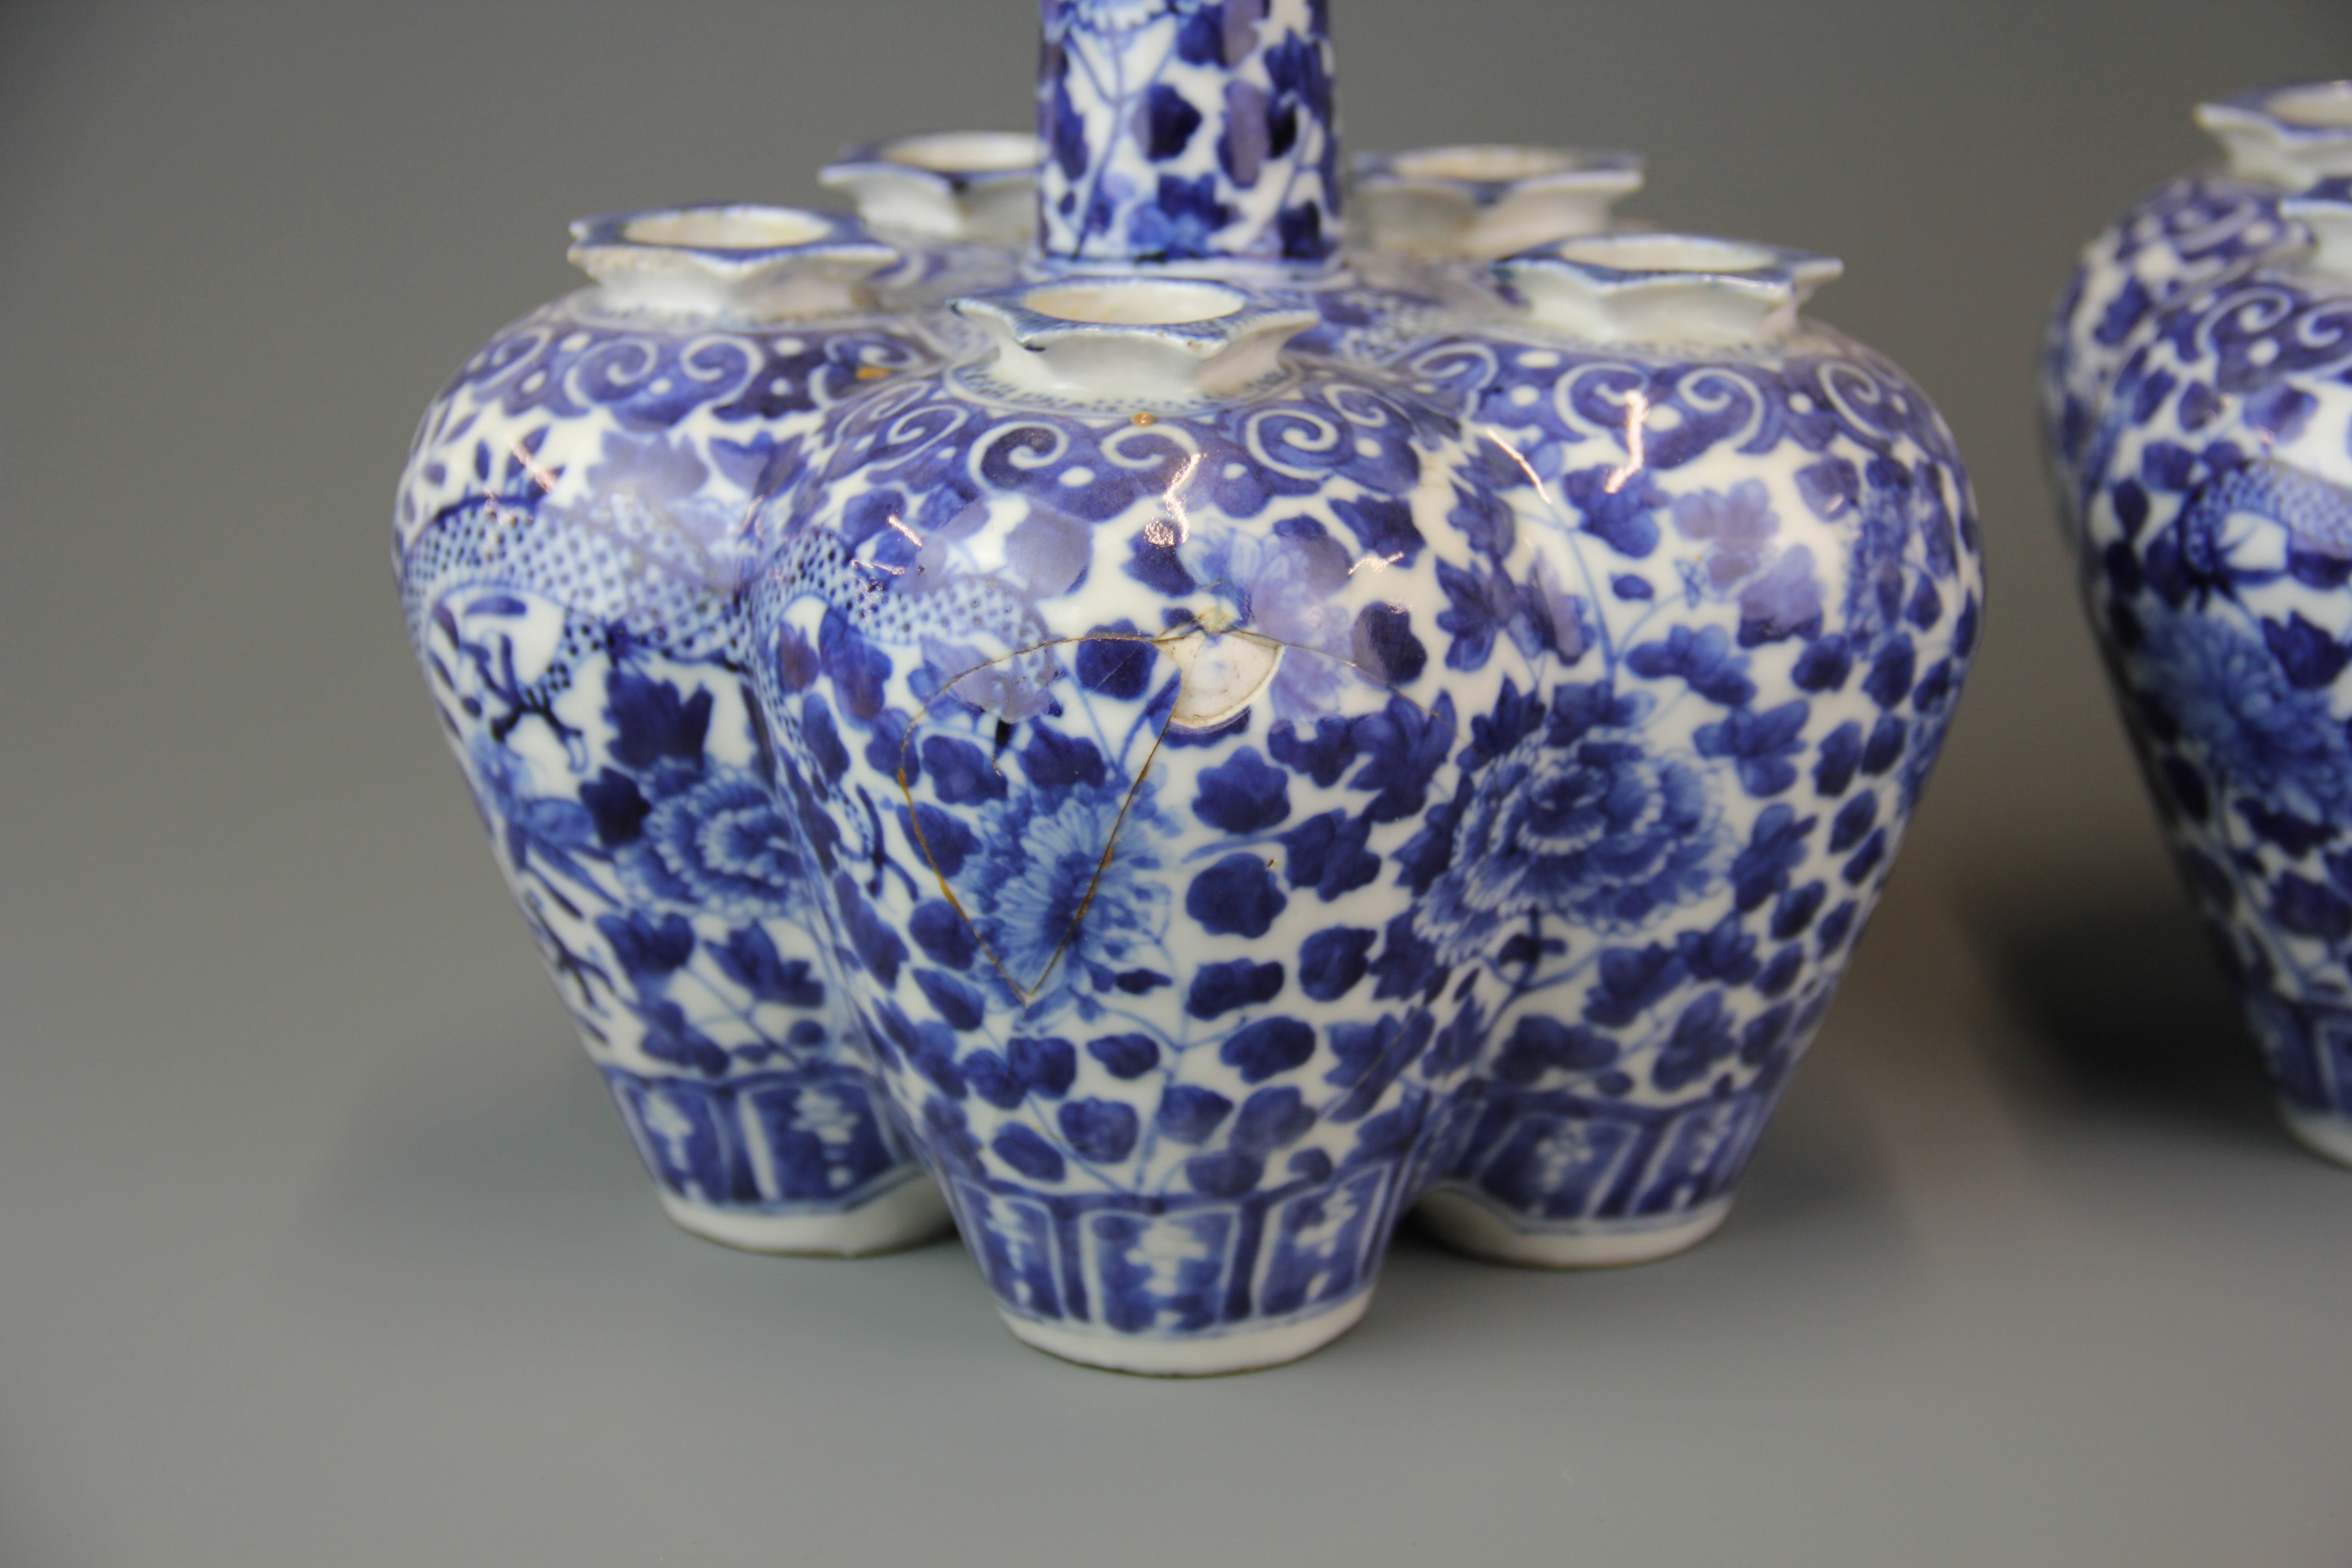 A fine pair of 18th century Chinese hand painted porcelain crocus vases, H. 25cm. A/F - Image 2 of 3